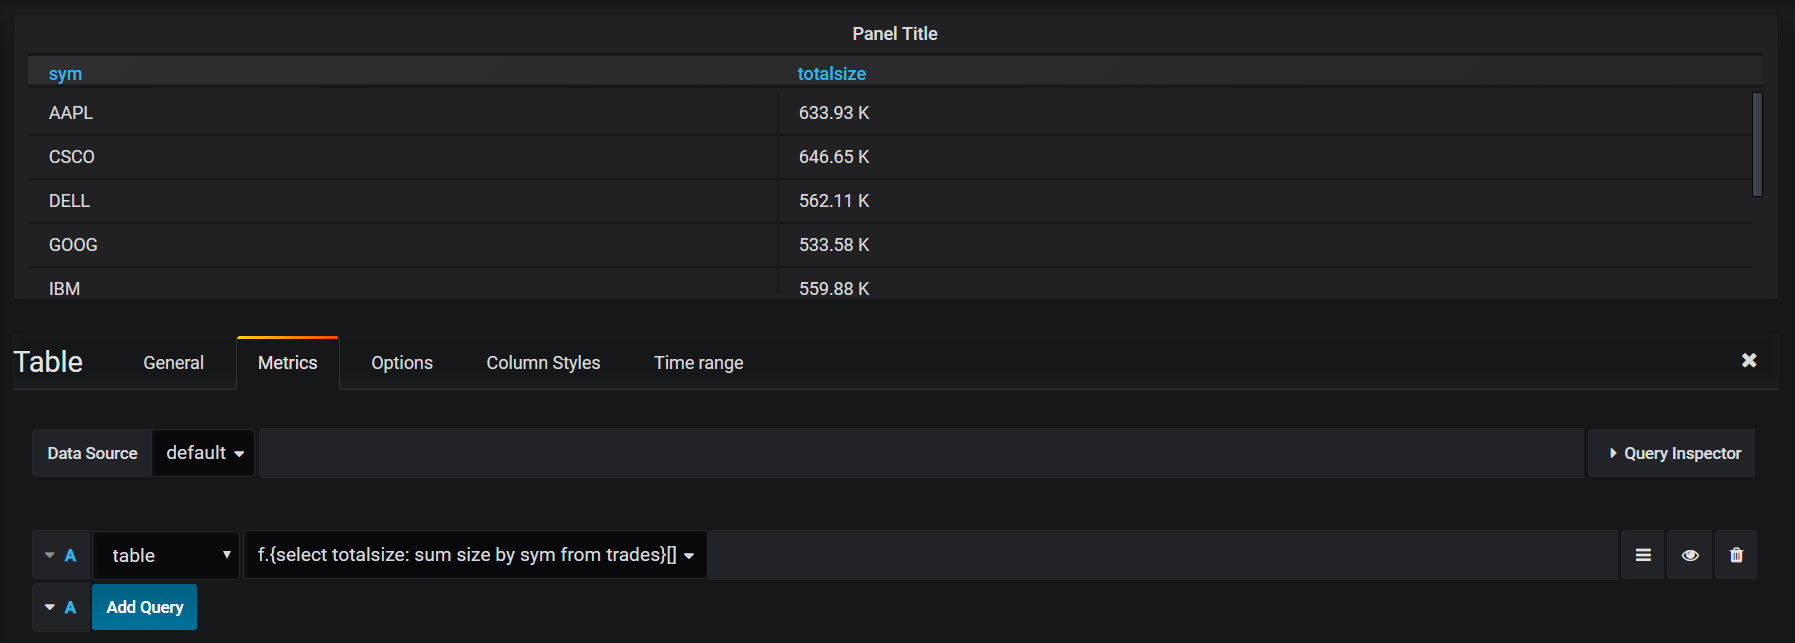 grafana table panel showing result of calling an anonymous function